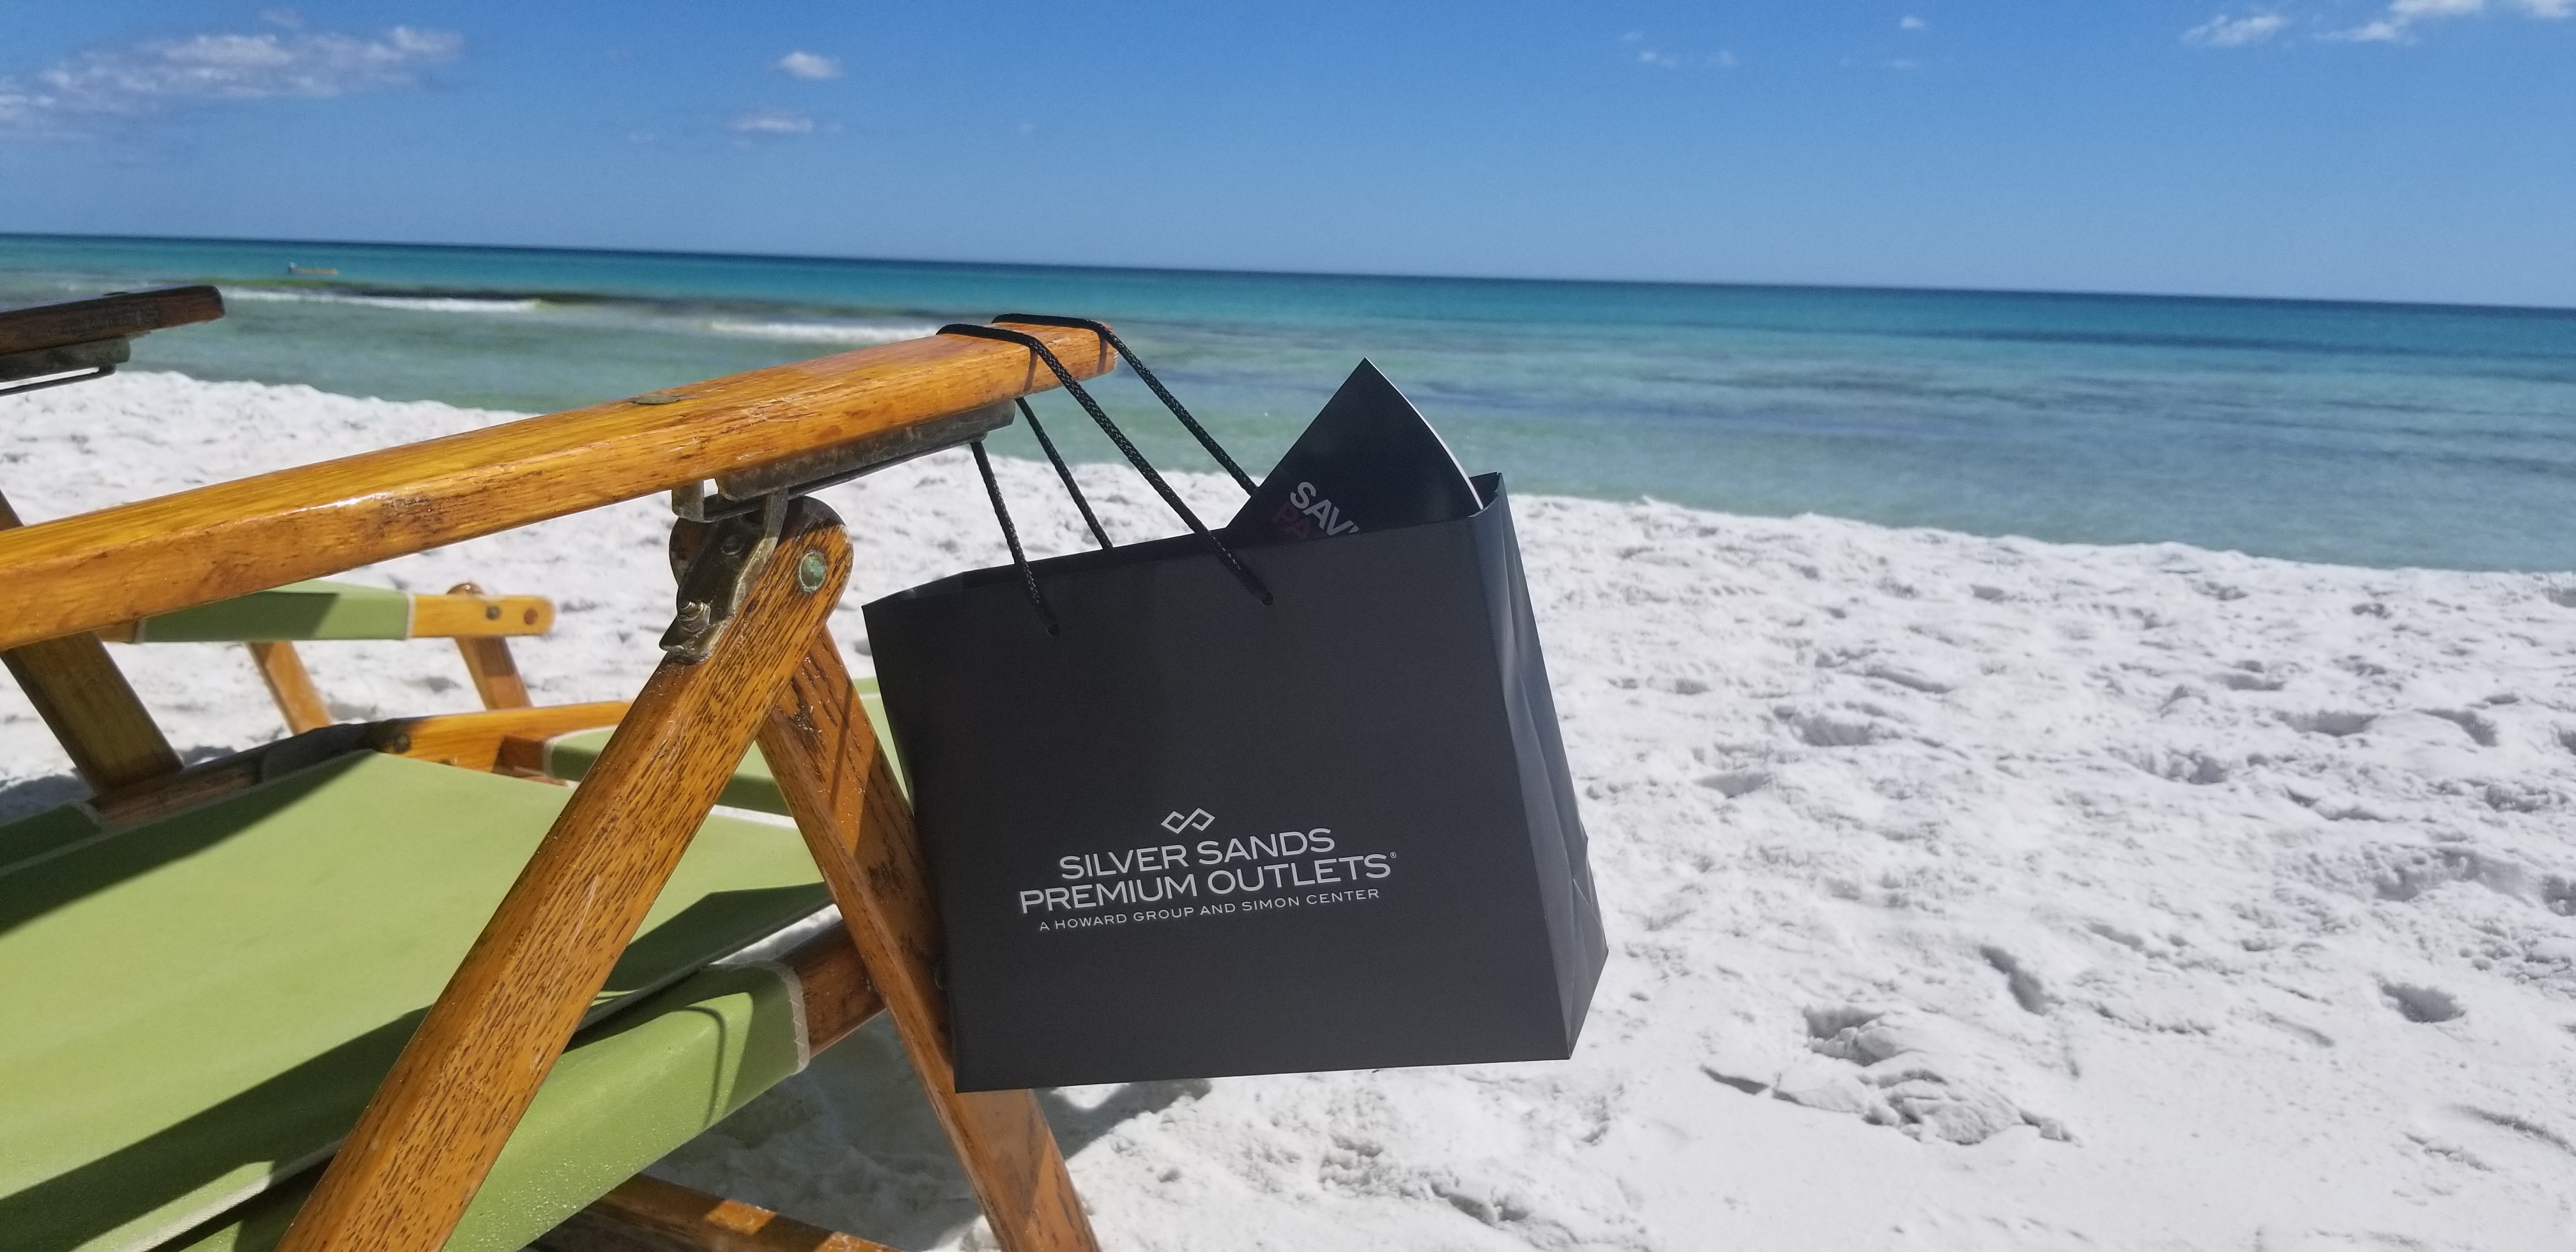 Travelers who enjoy shopping and the beach are discovering Miramar Beach, Florida is renowned for soft white sand beaches and deals on brand name merchandise at Silver Sands Premium Outlets. 